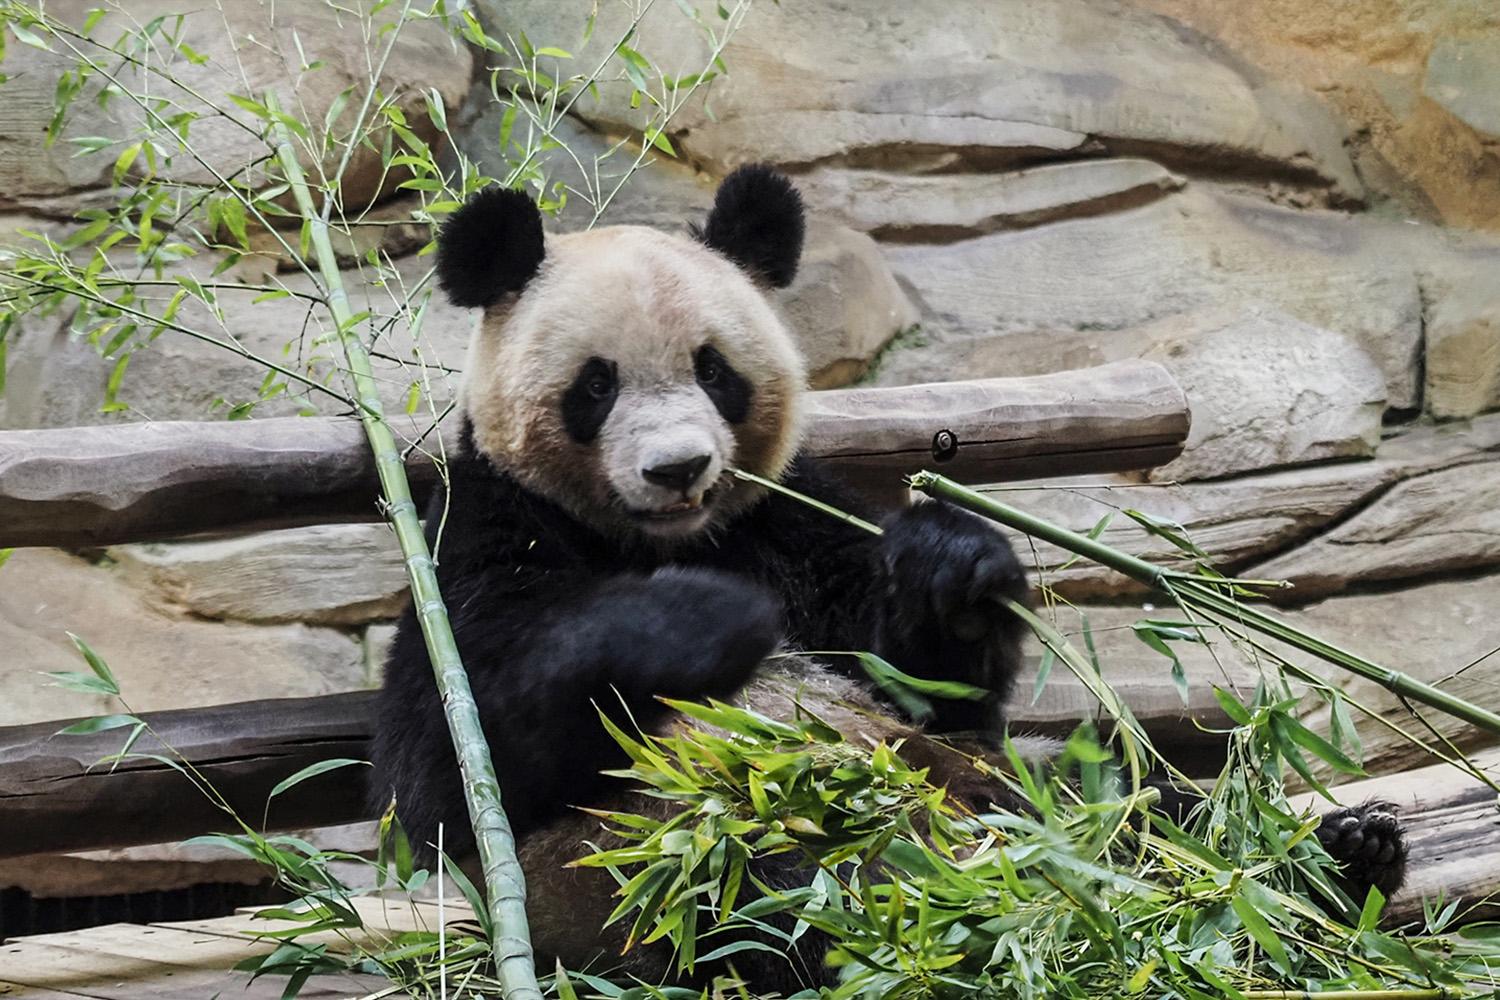 pandas-are-not-all-black-and-white-genetic-caused-some-brown-SPACEBAR-Hero.jpg